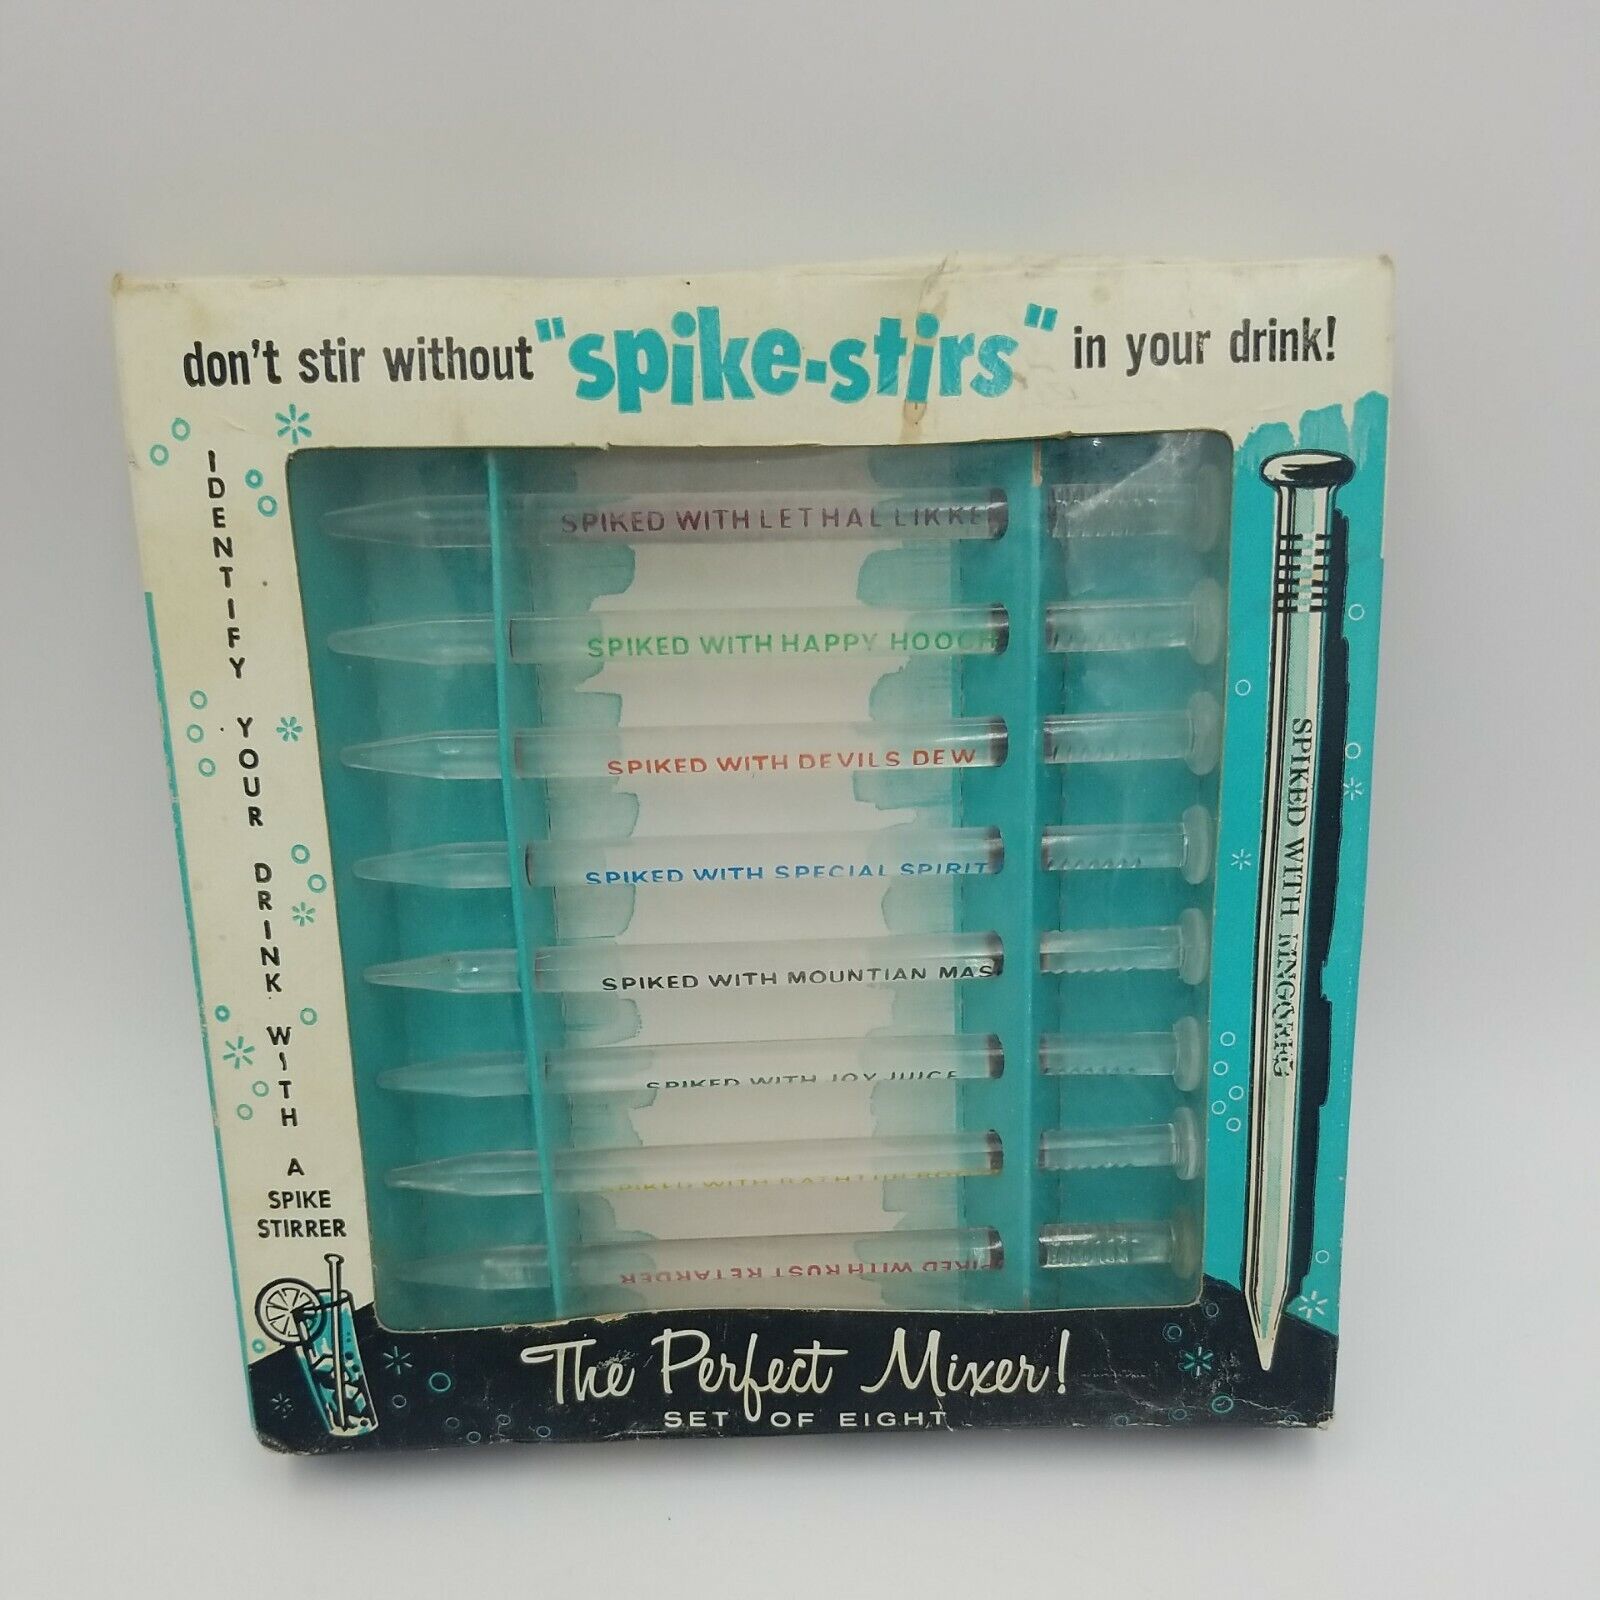 Vintage 8 Pack Spike-Stirs, Plastic Spikes to Identify Your Drink & Add Humor